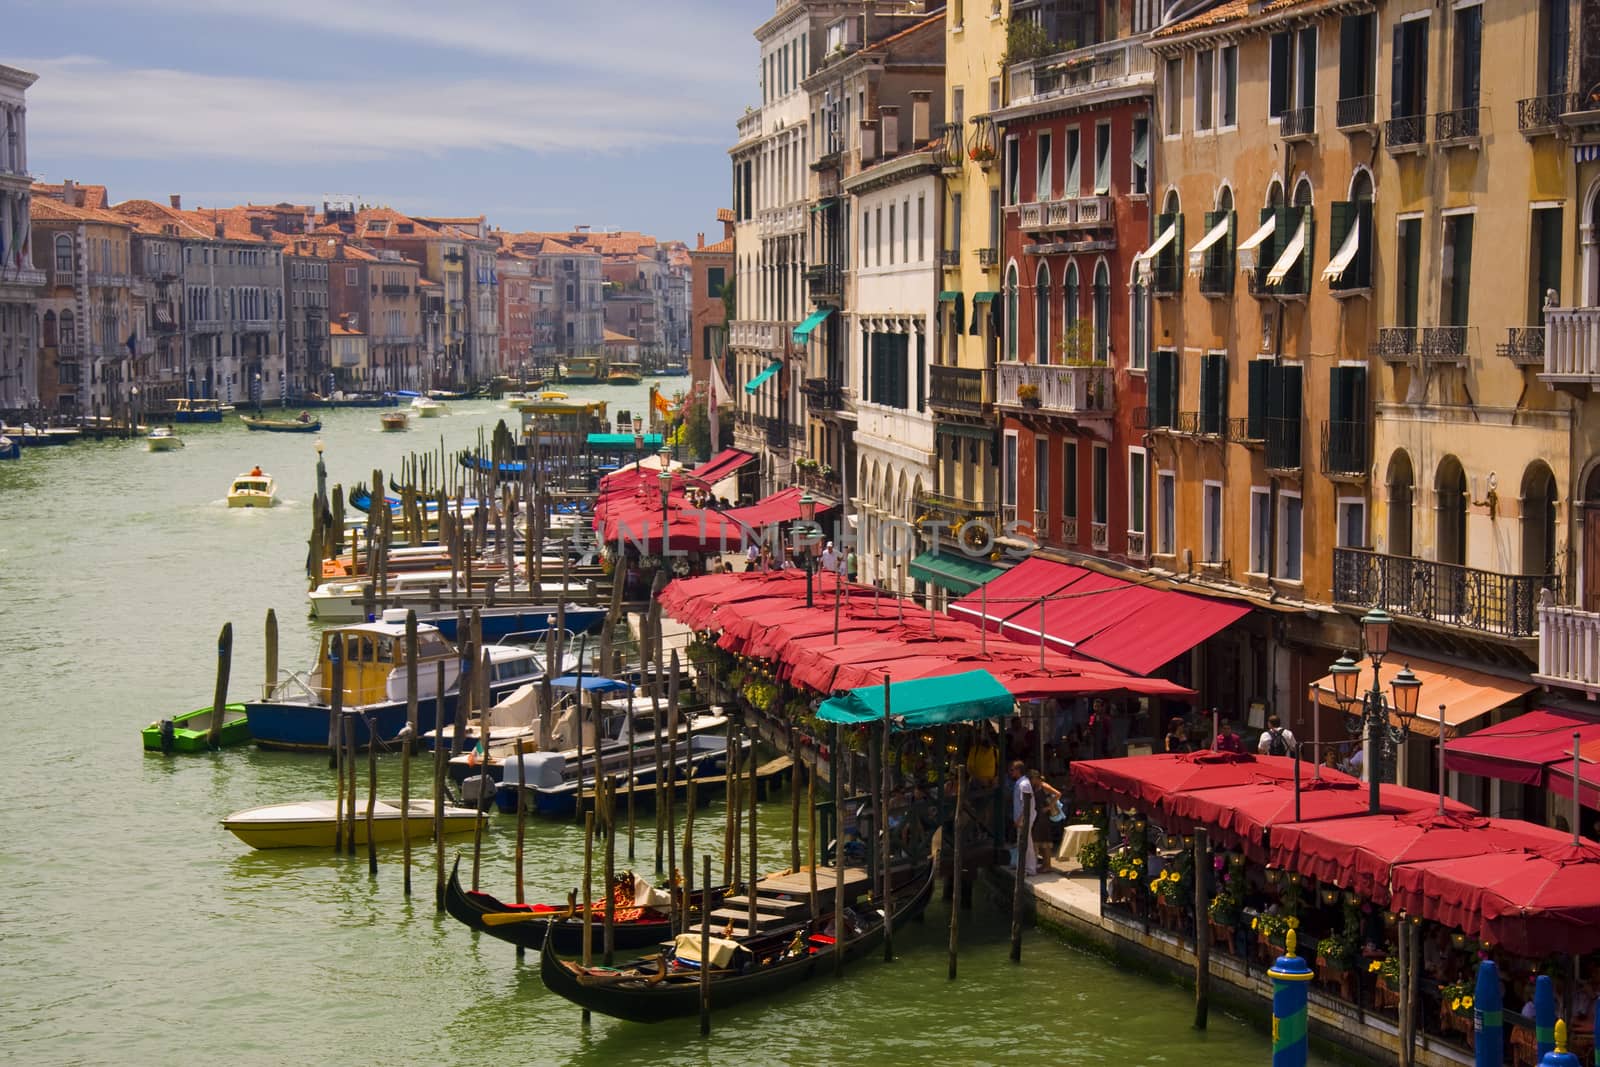 Grand Canal view and Gondolas in Venice by fotoecho